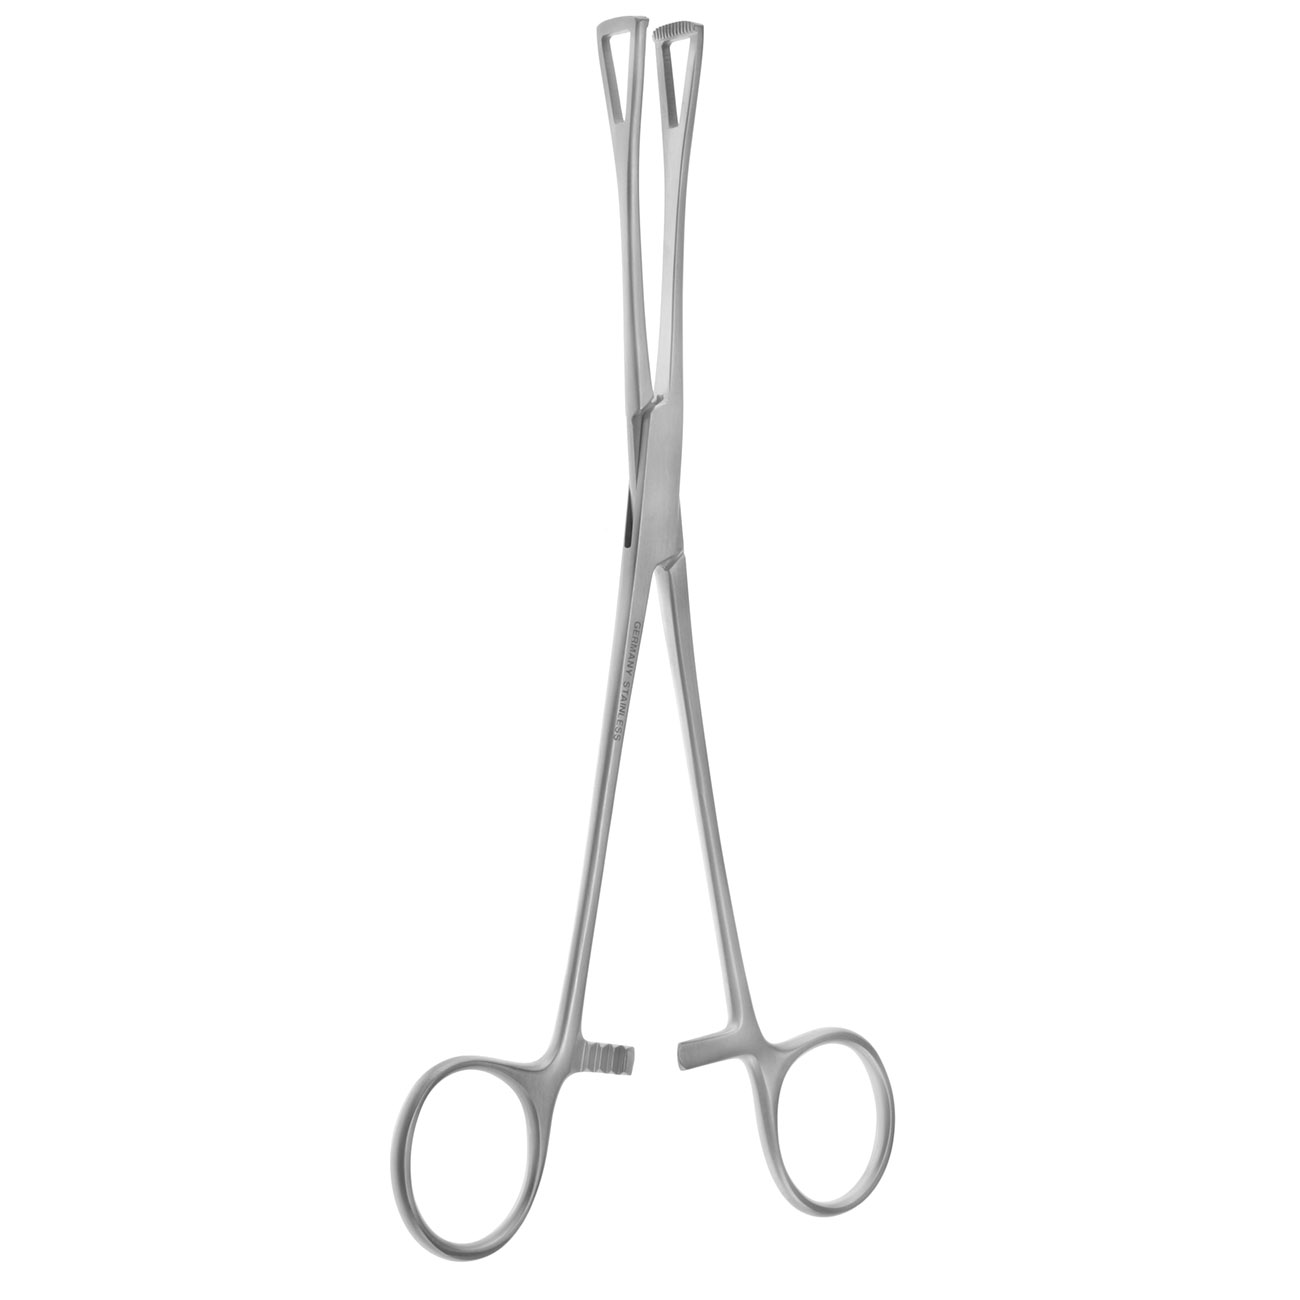 8 1/4" Lung Forceps. - - BOSS Surgical Instruments